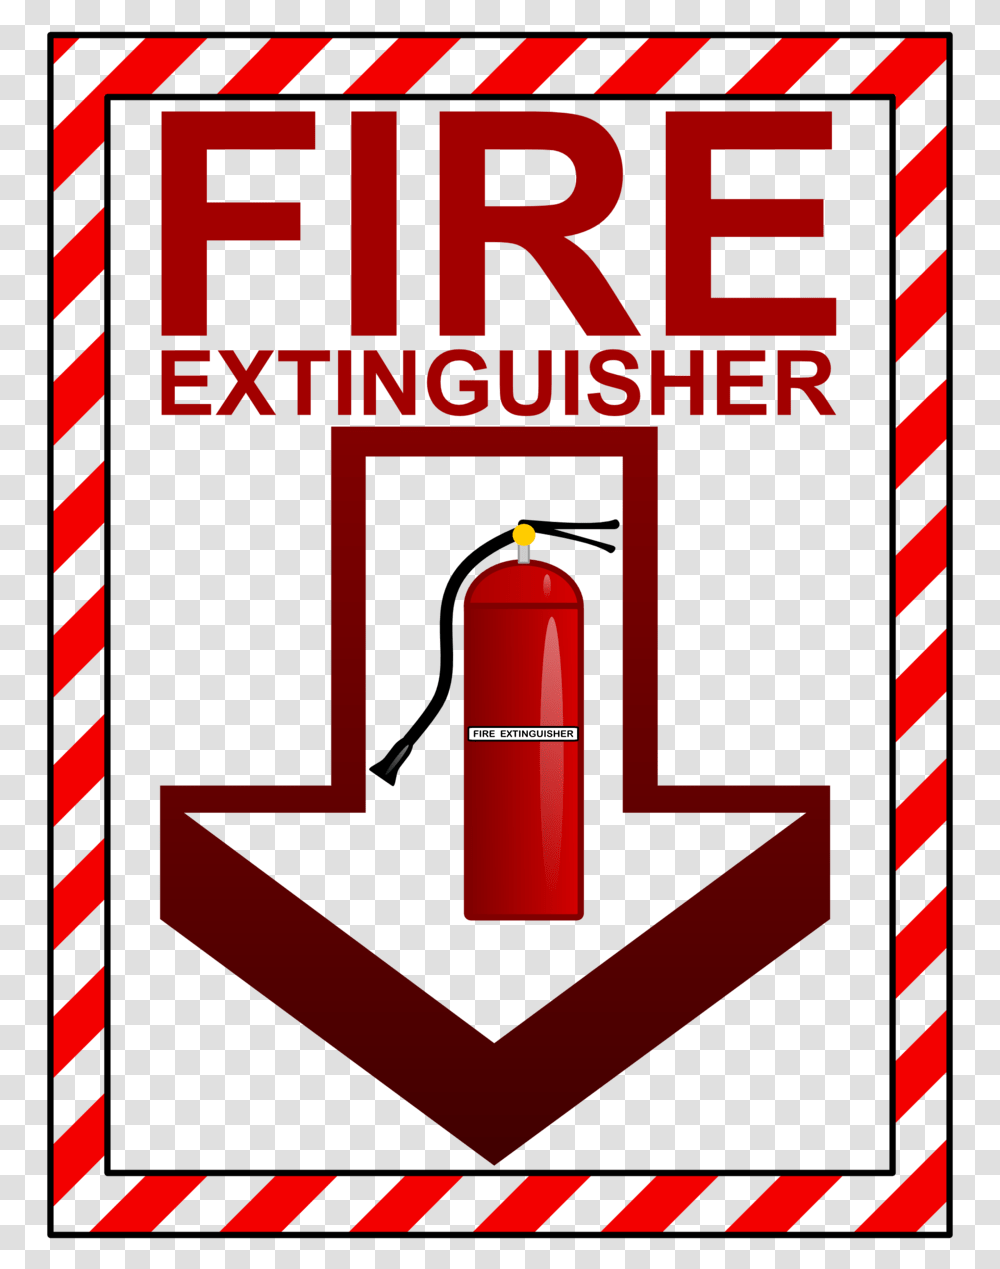 Fire Extinguisher Clipart Fire Extinguishers Clip Art Fire Extinguisher Sign High Resolution, Bomb, Weapon, Weaponry Transparent Png